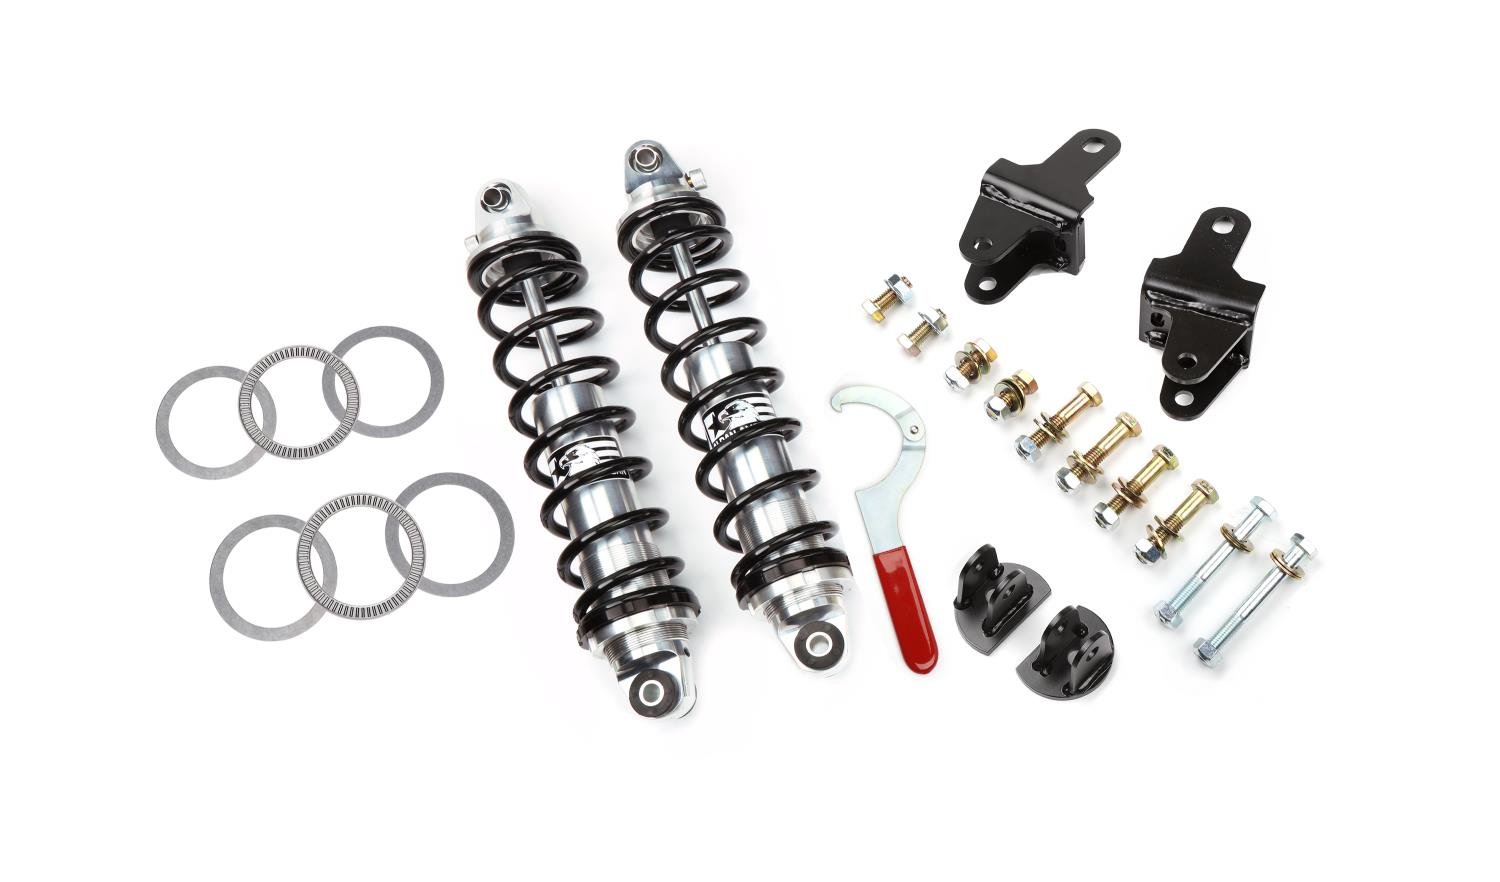 Road Comp Series Rear Coilover Conversion Kit 1979-2004 Ford Mustang, Single-Adjustable [160 lbs./in. Springs]